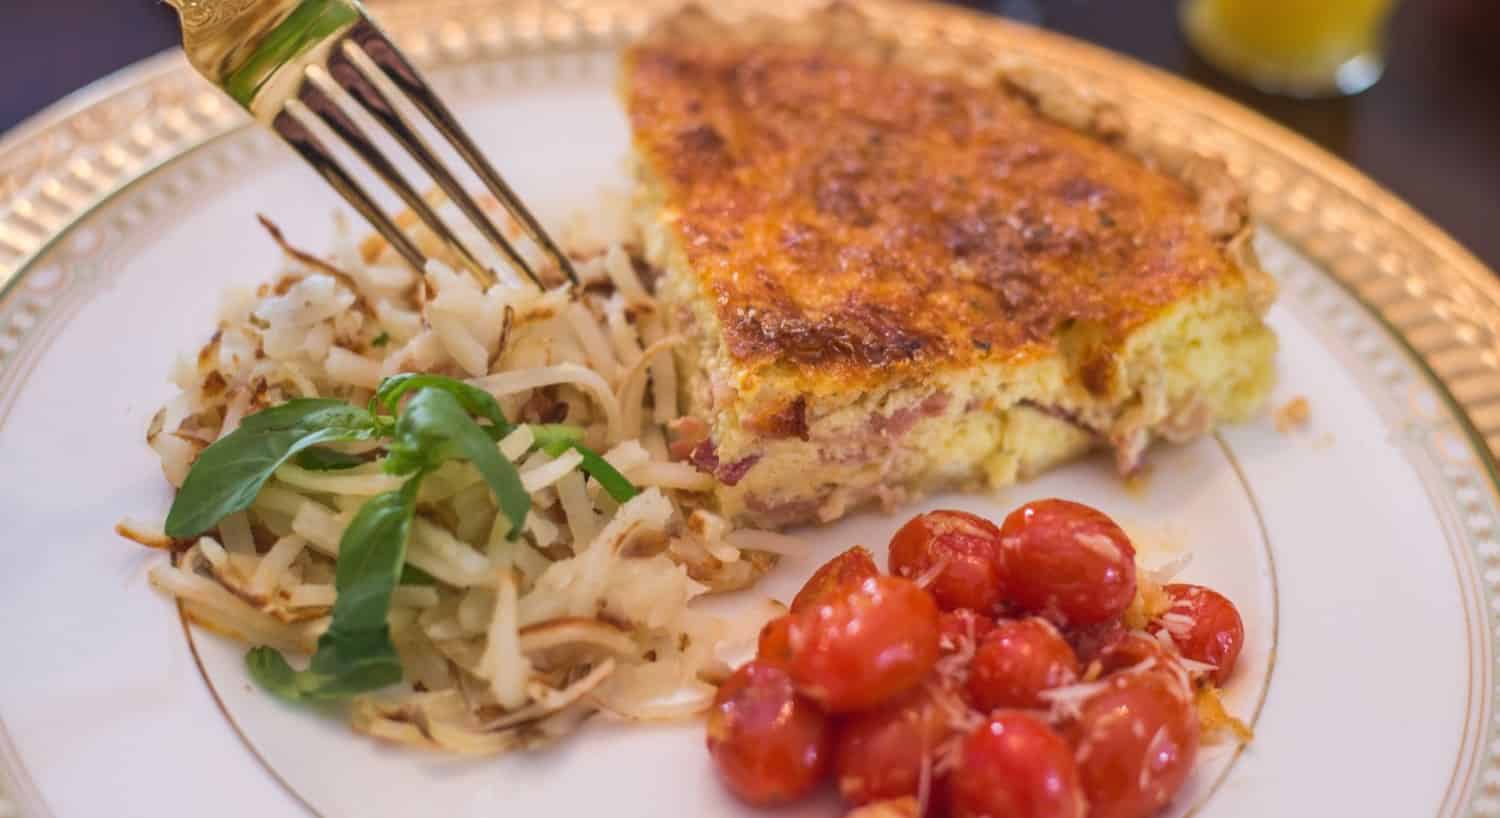 Close up view of breakfast dish with quiche, potatoes, and tomatoes